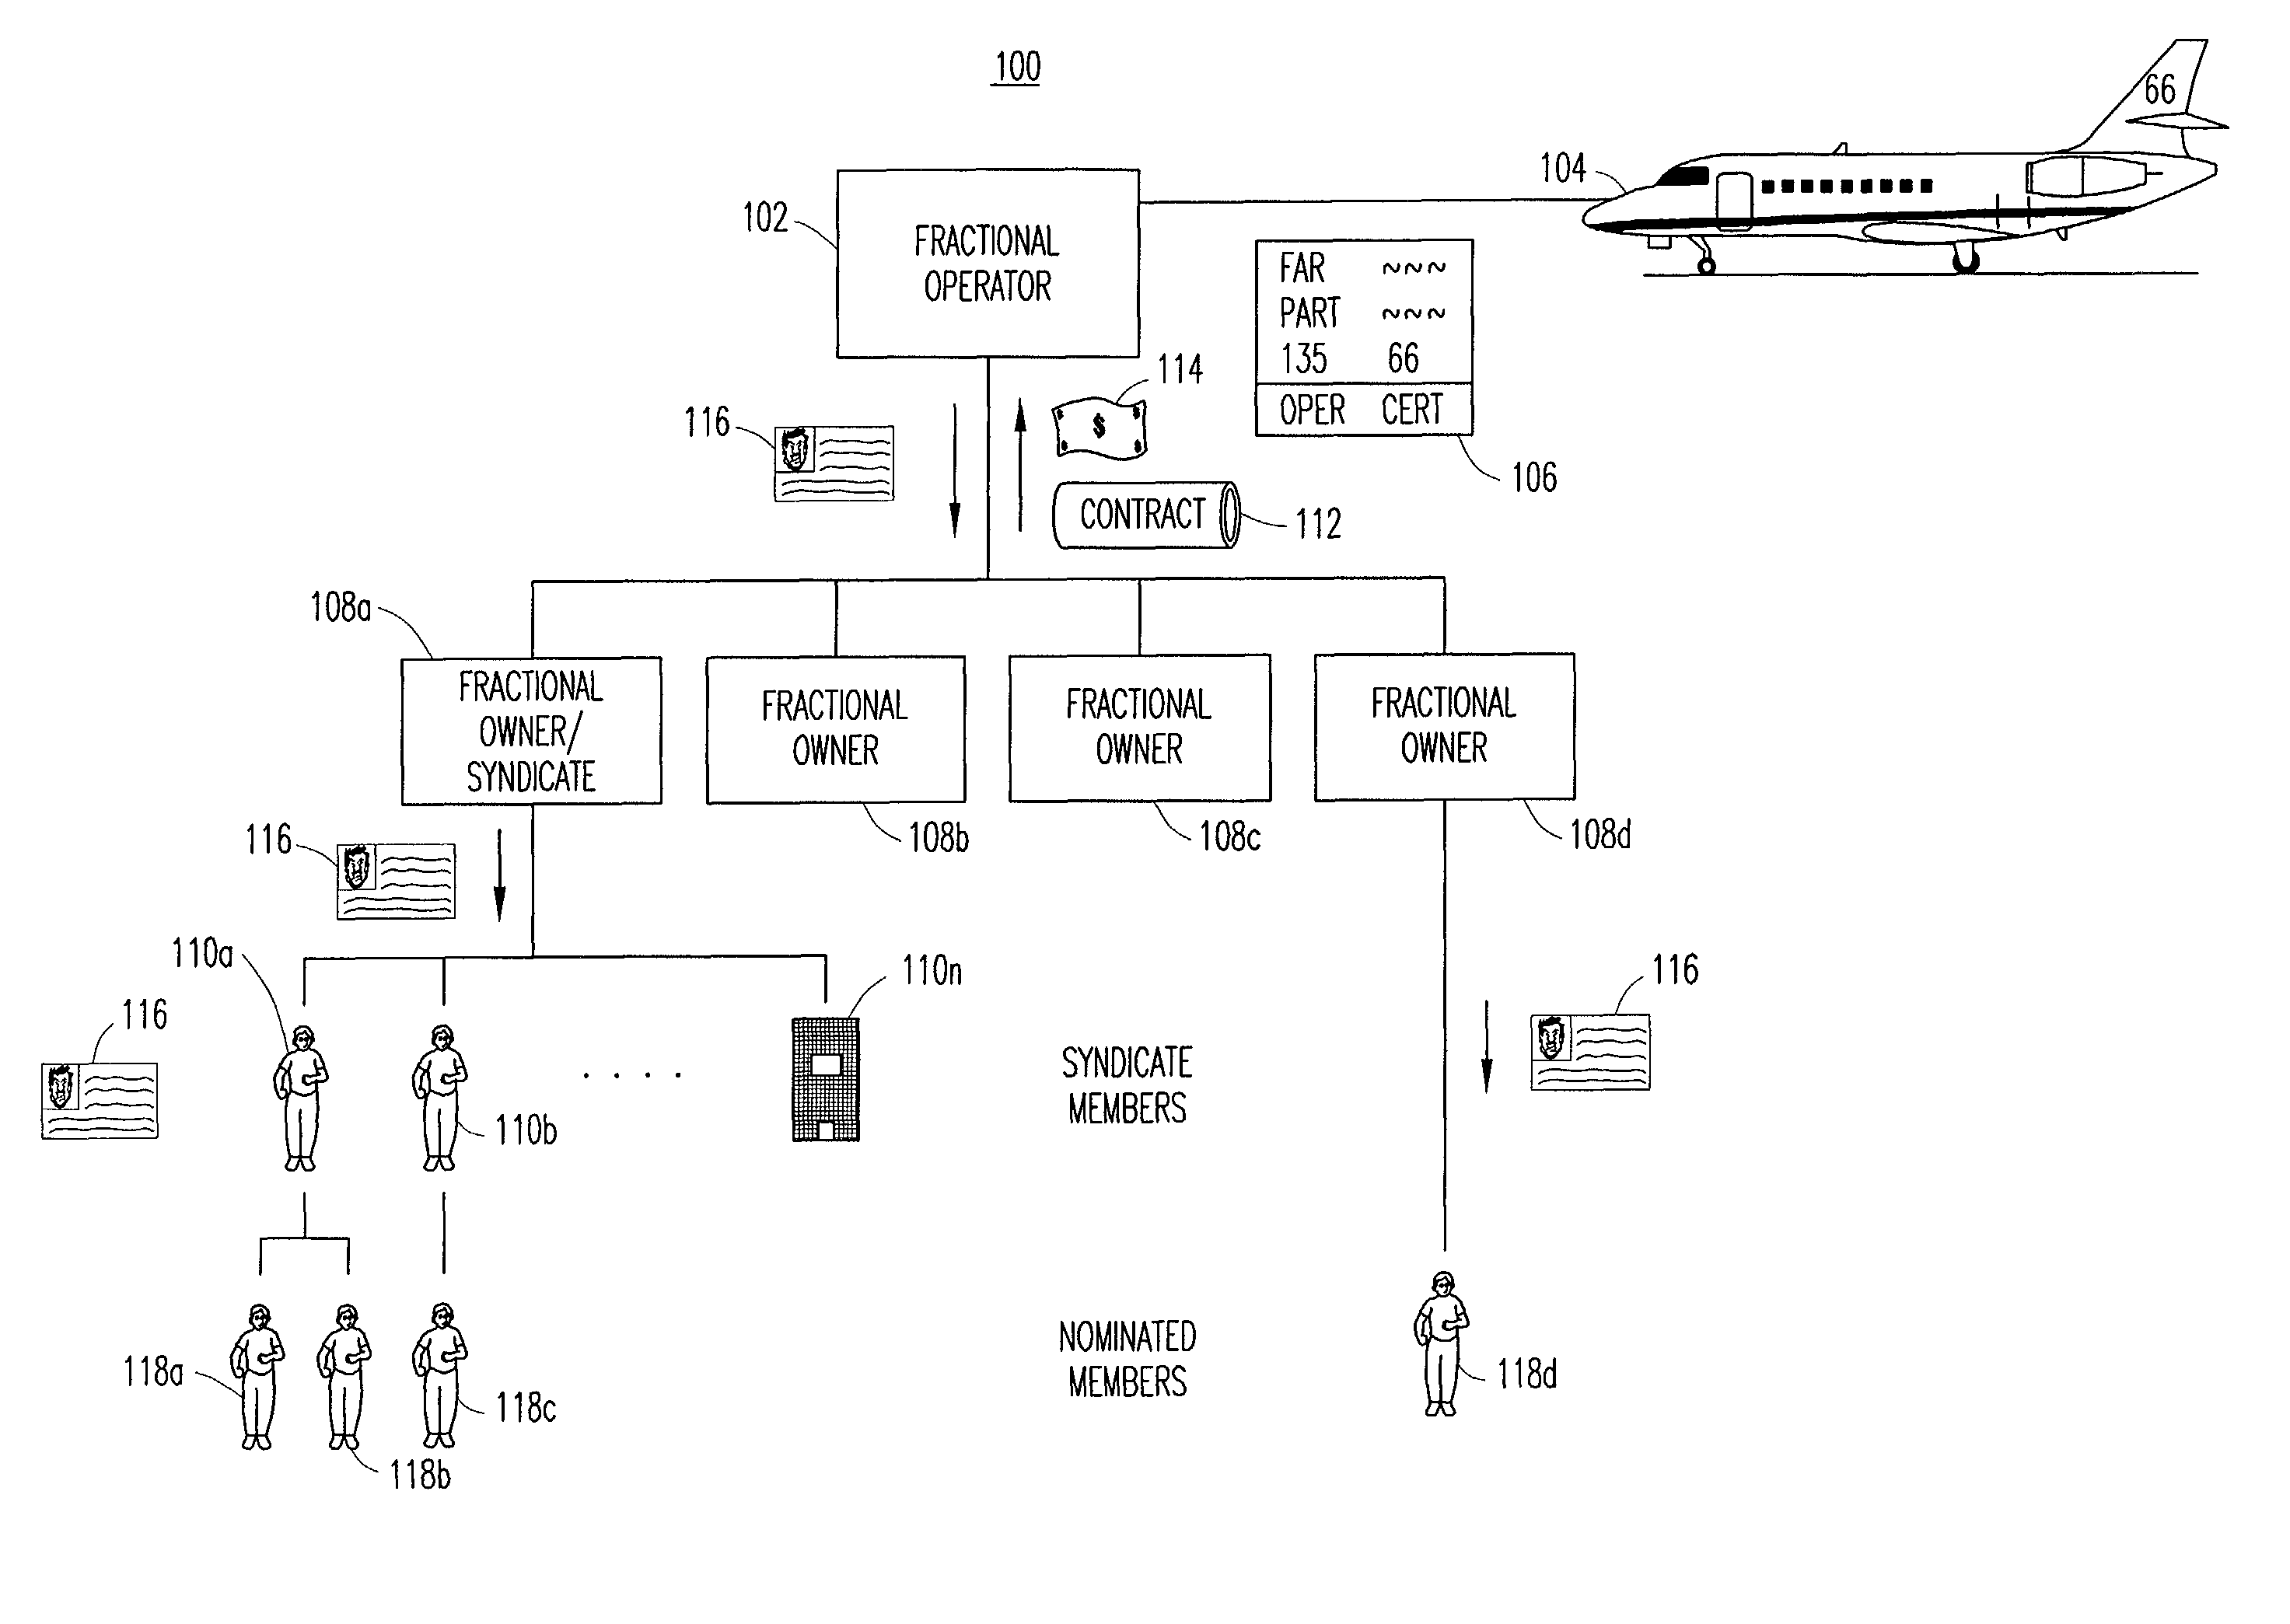 Method and system for providing and managing a fractional aircraft ownership program